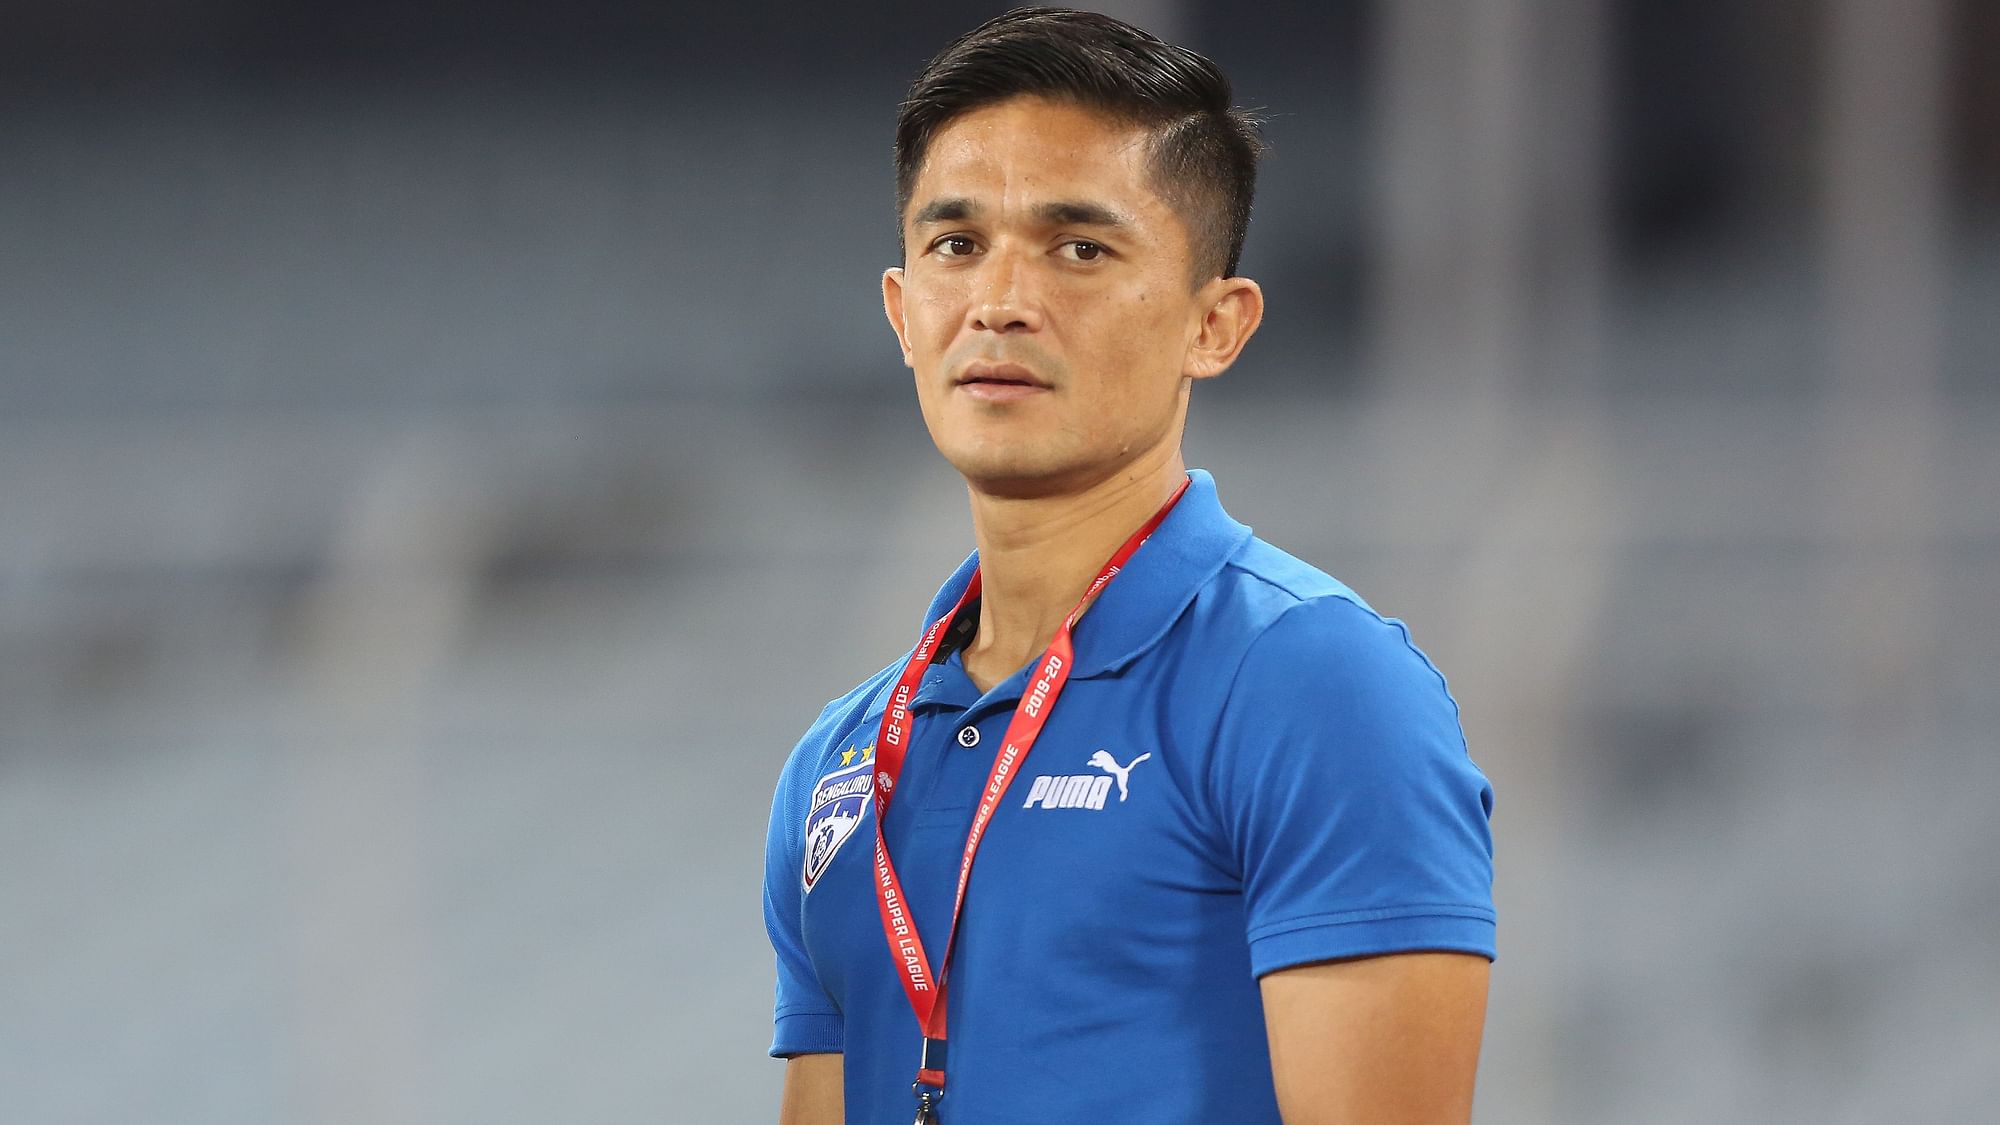 India’s football team captain Sunil Chhetri received a message from a fan who wanted his Netflix ID and password.